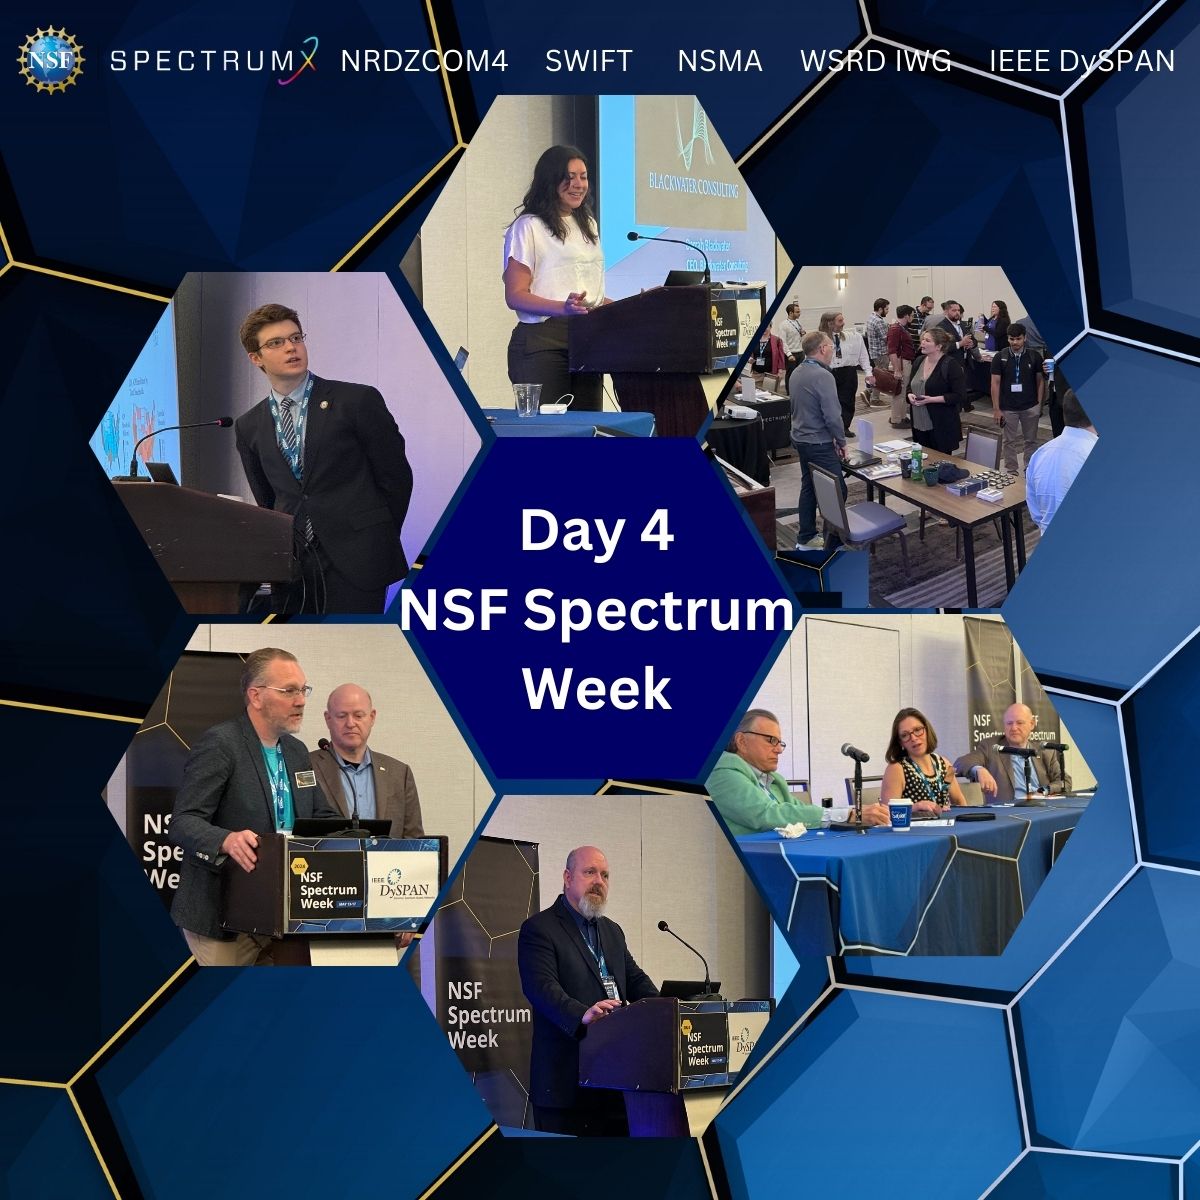 🛰 Day 4 of the 2024 @NSF Spectrum Week has started! Today brings NSF NDRZ into the agenda - bringing different focuses, research, and innovators to the conversations had on-site. 🔗 Learn more about the agenda for the rest of the day at: spectrumweek.org